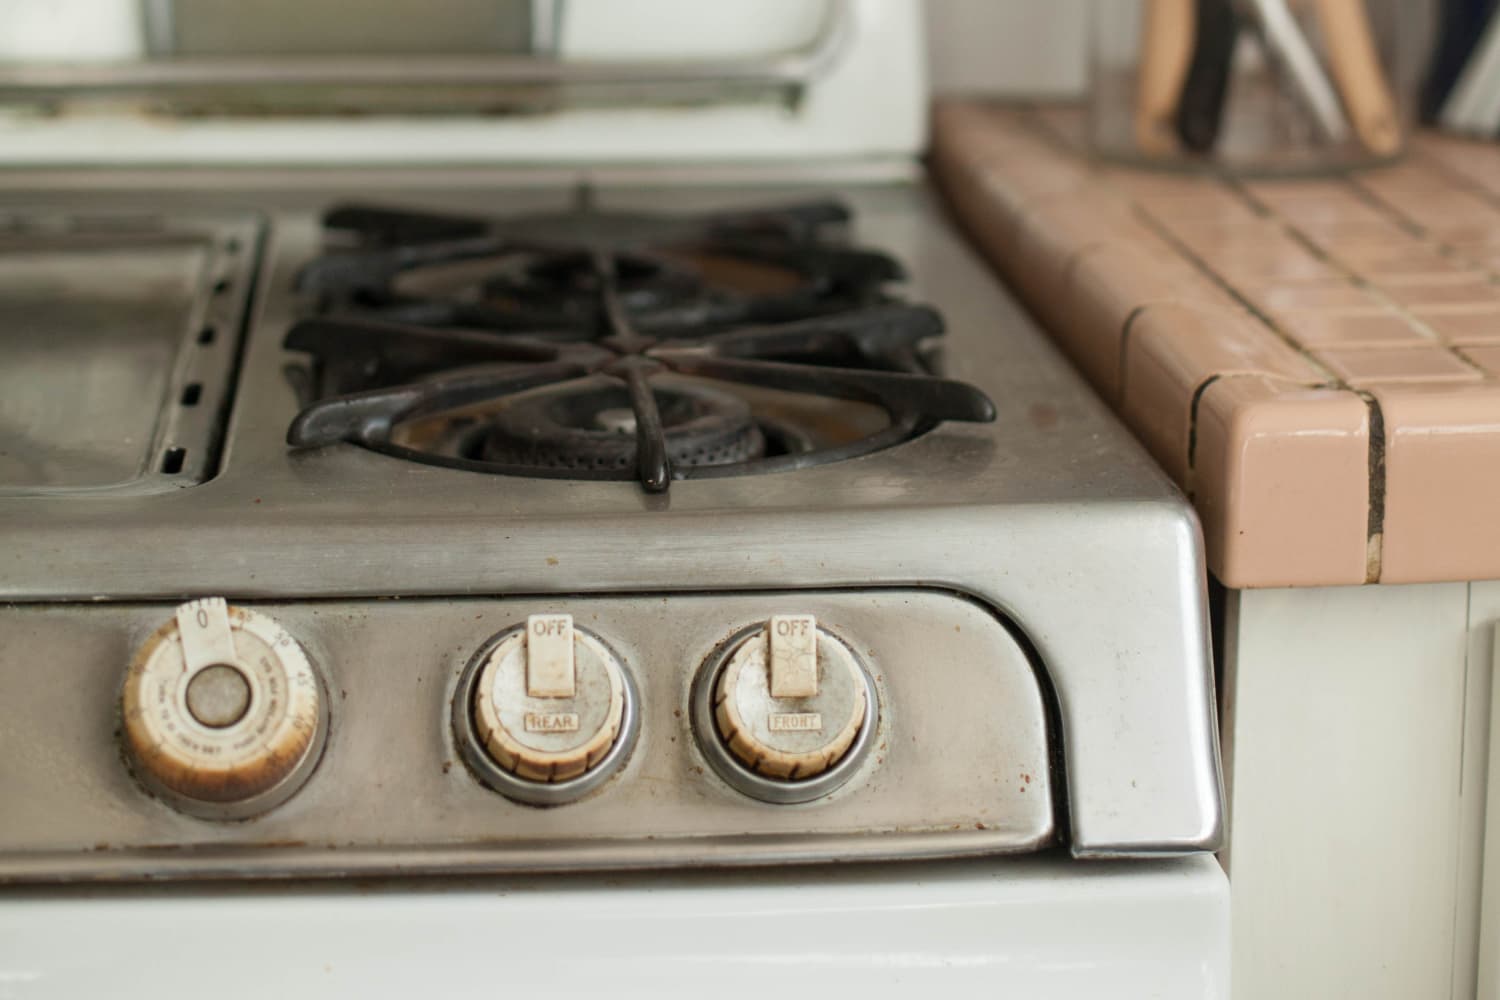 Cooktop or Range: What's Best for Your Rental Property?